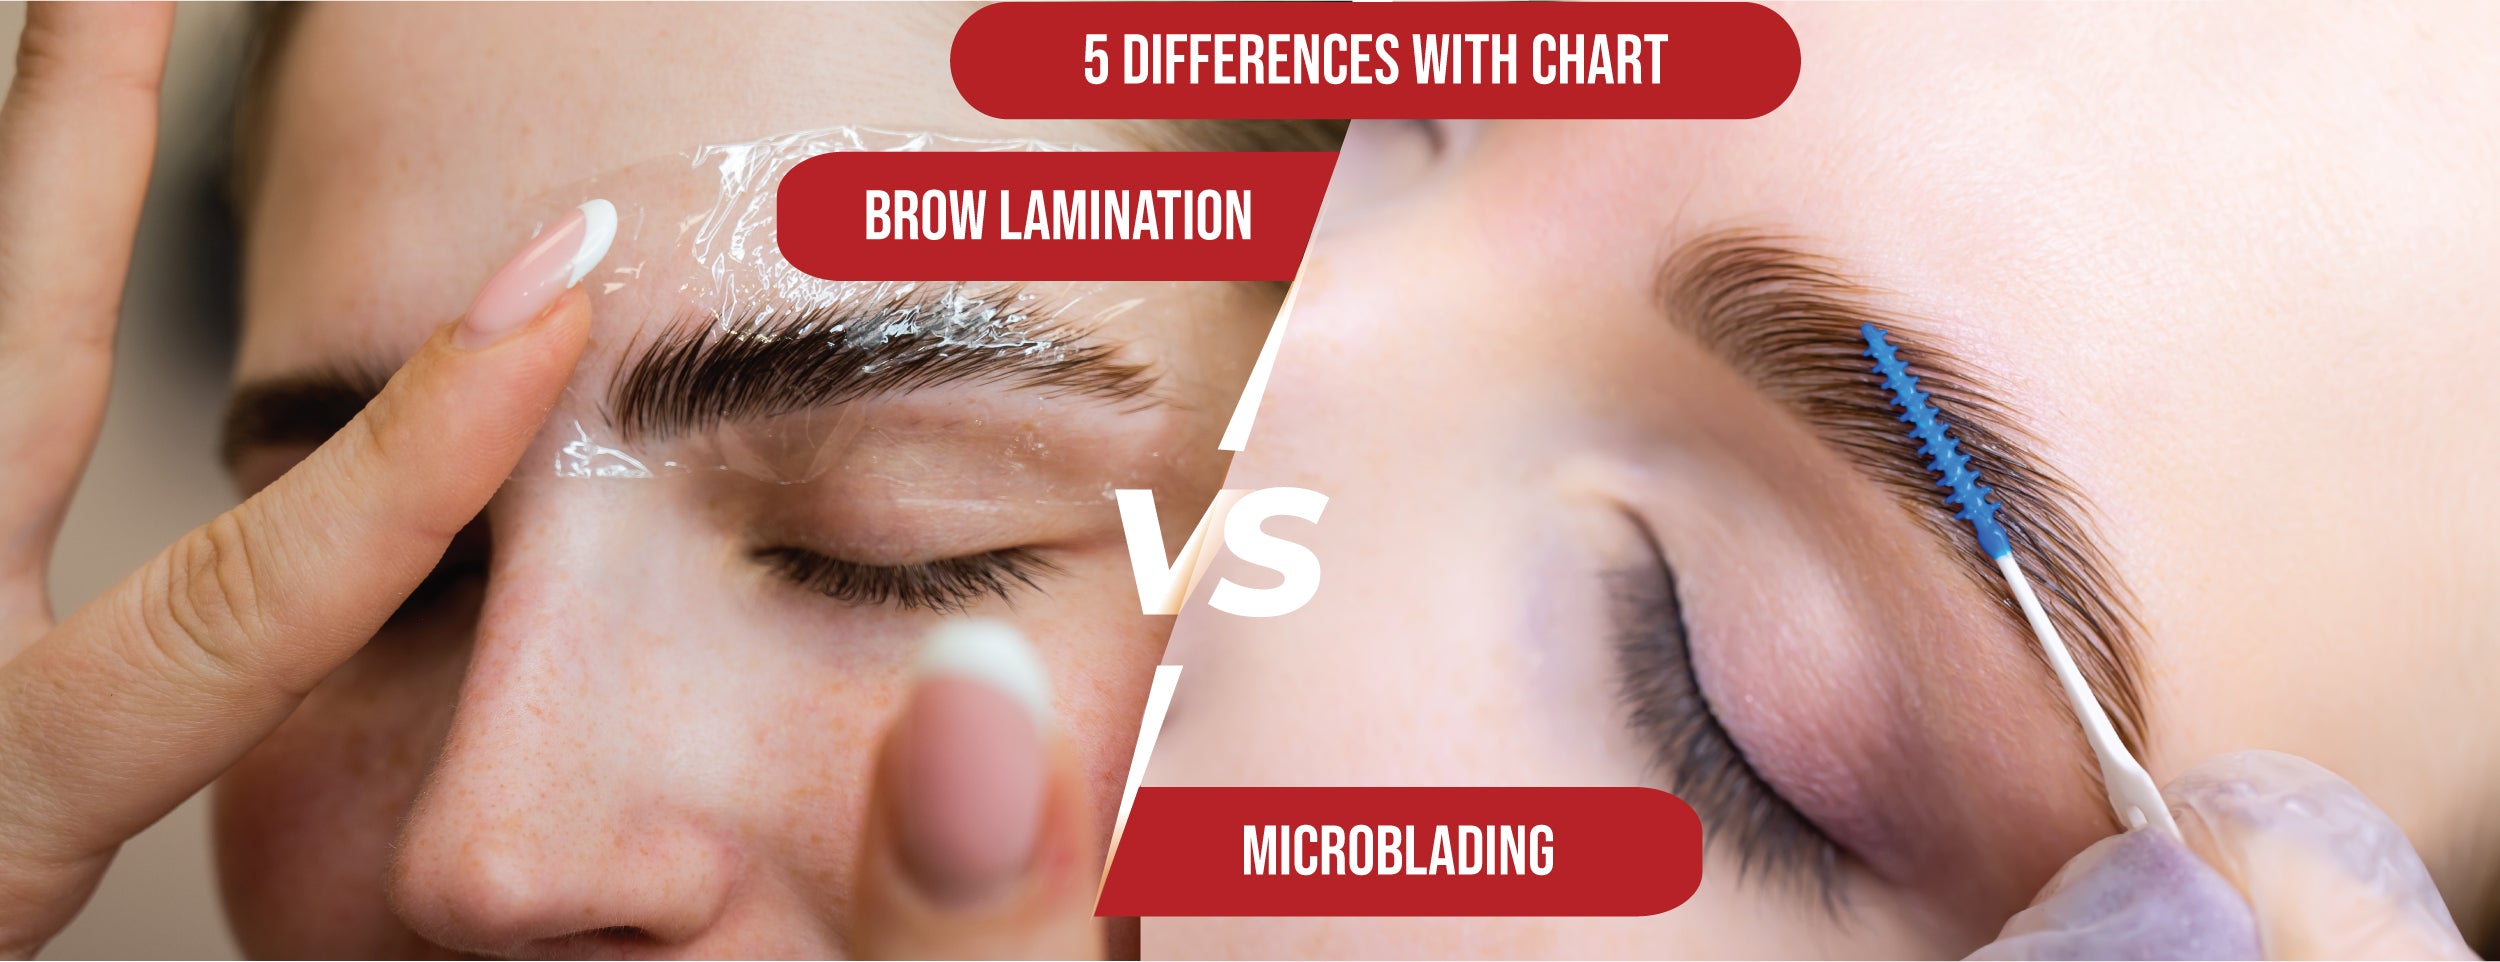 5 Differences Between Brow Lamination and Microblading